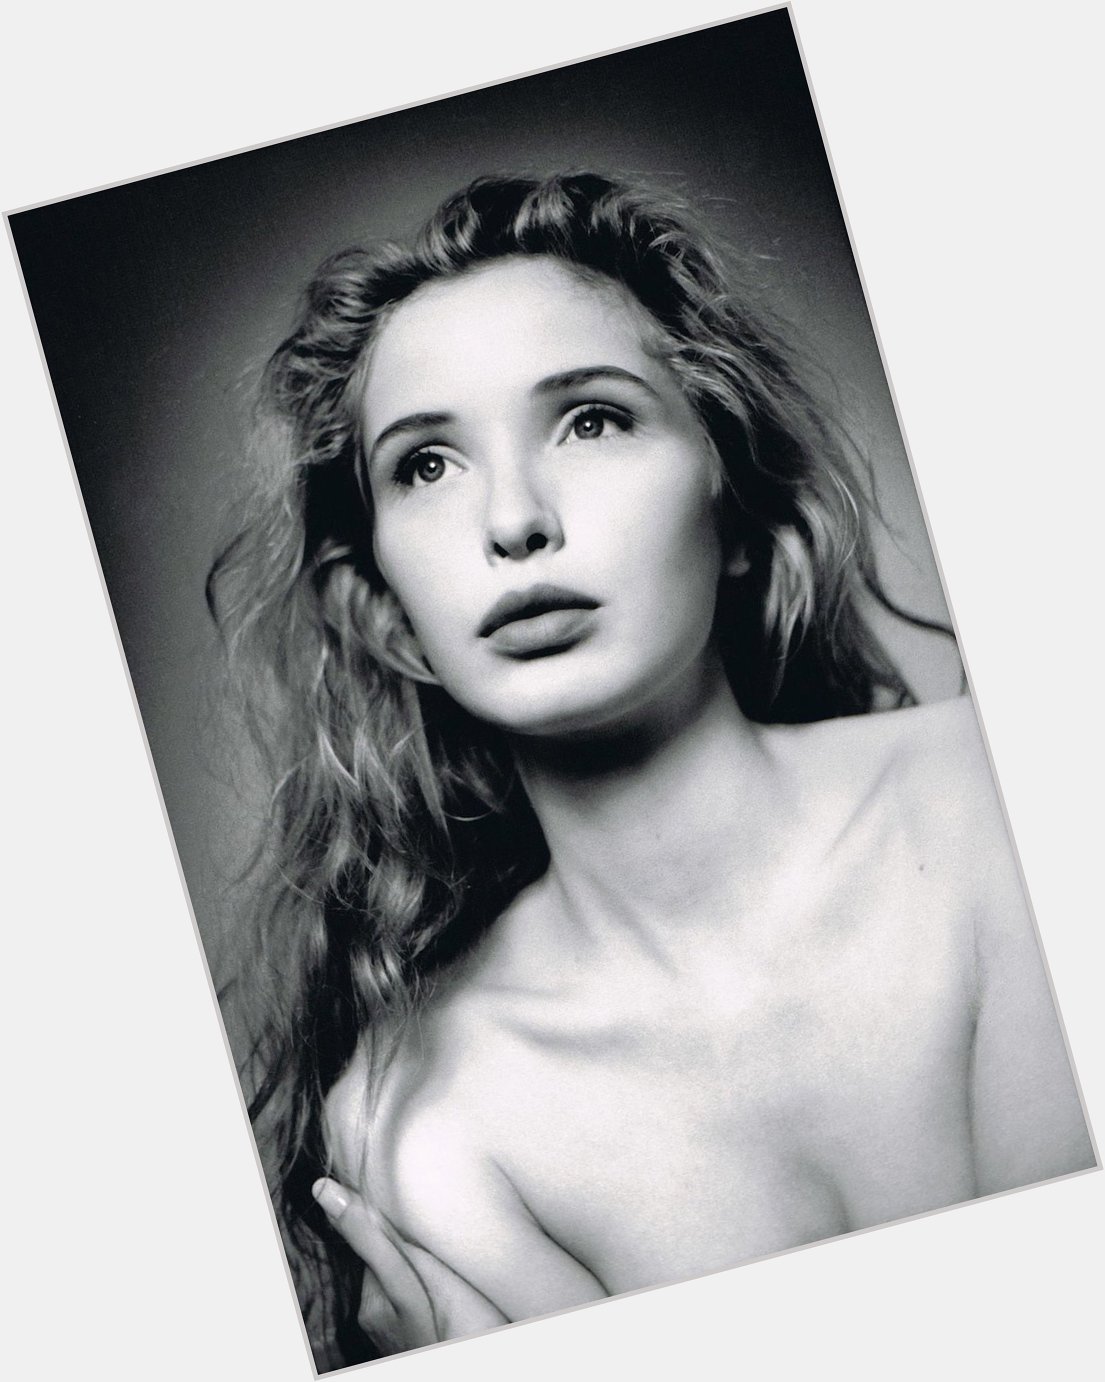    Wishing a very happy birthday to the talented and gorgeous Julie Delpy! 